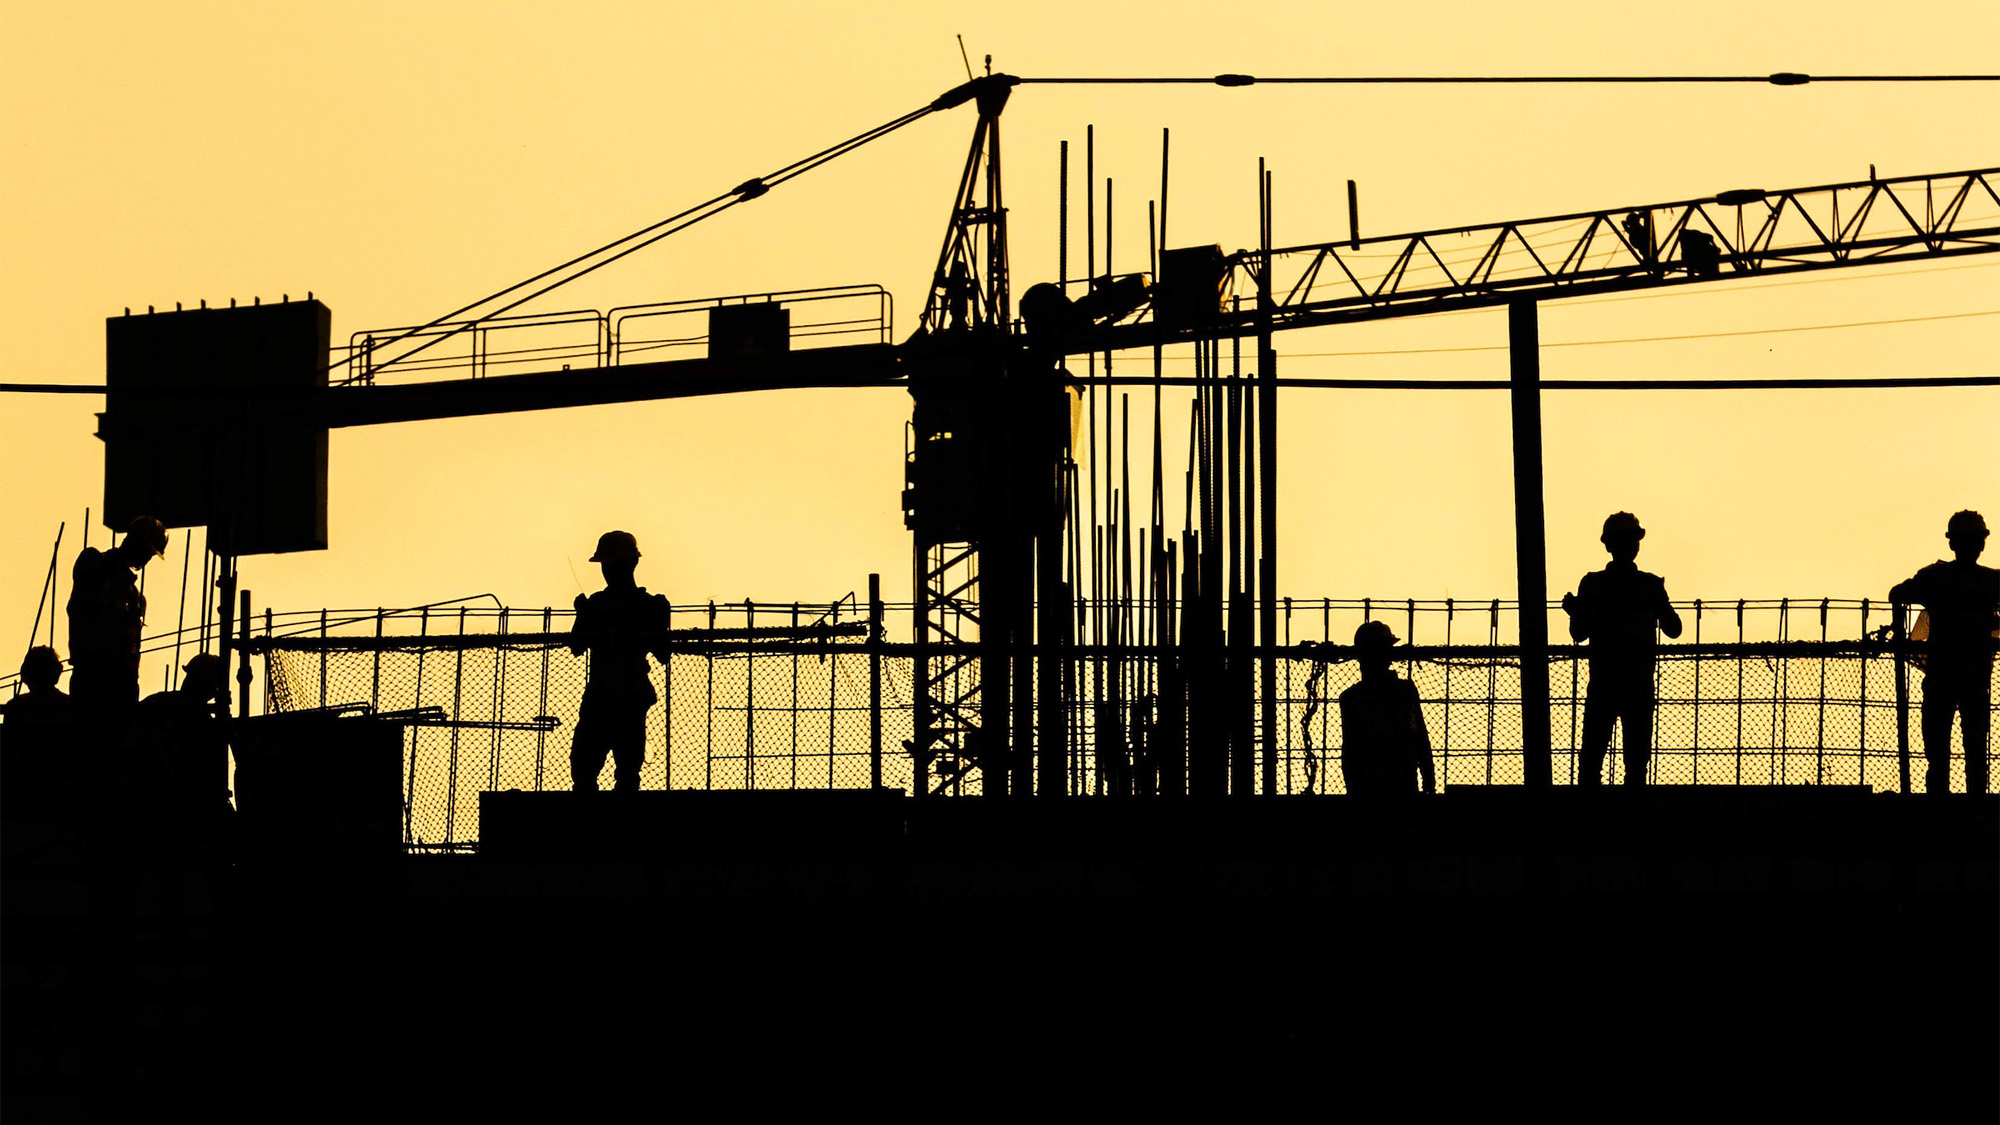 Construction works and a crane are silhouetted against a bright yellow sky